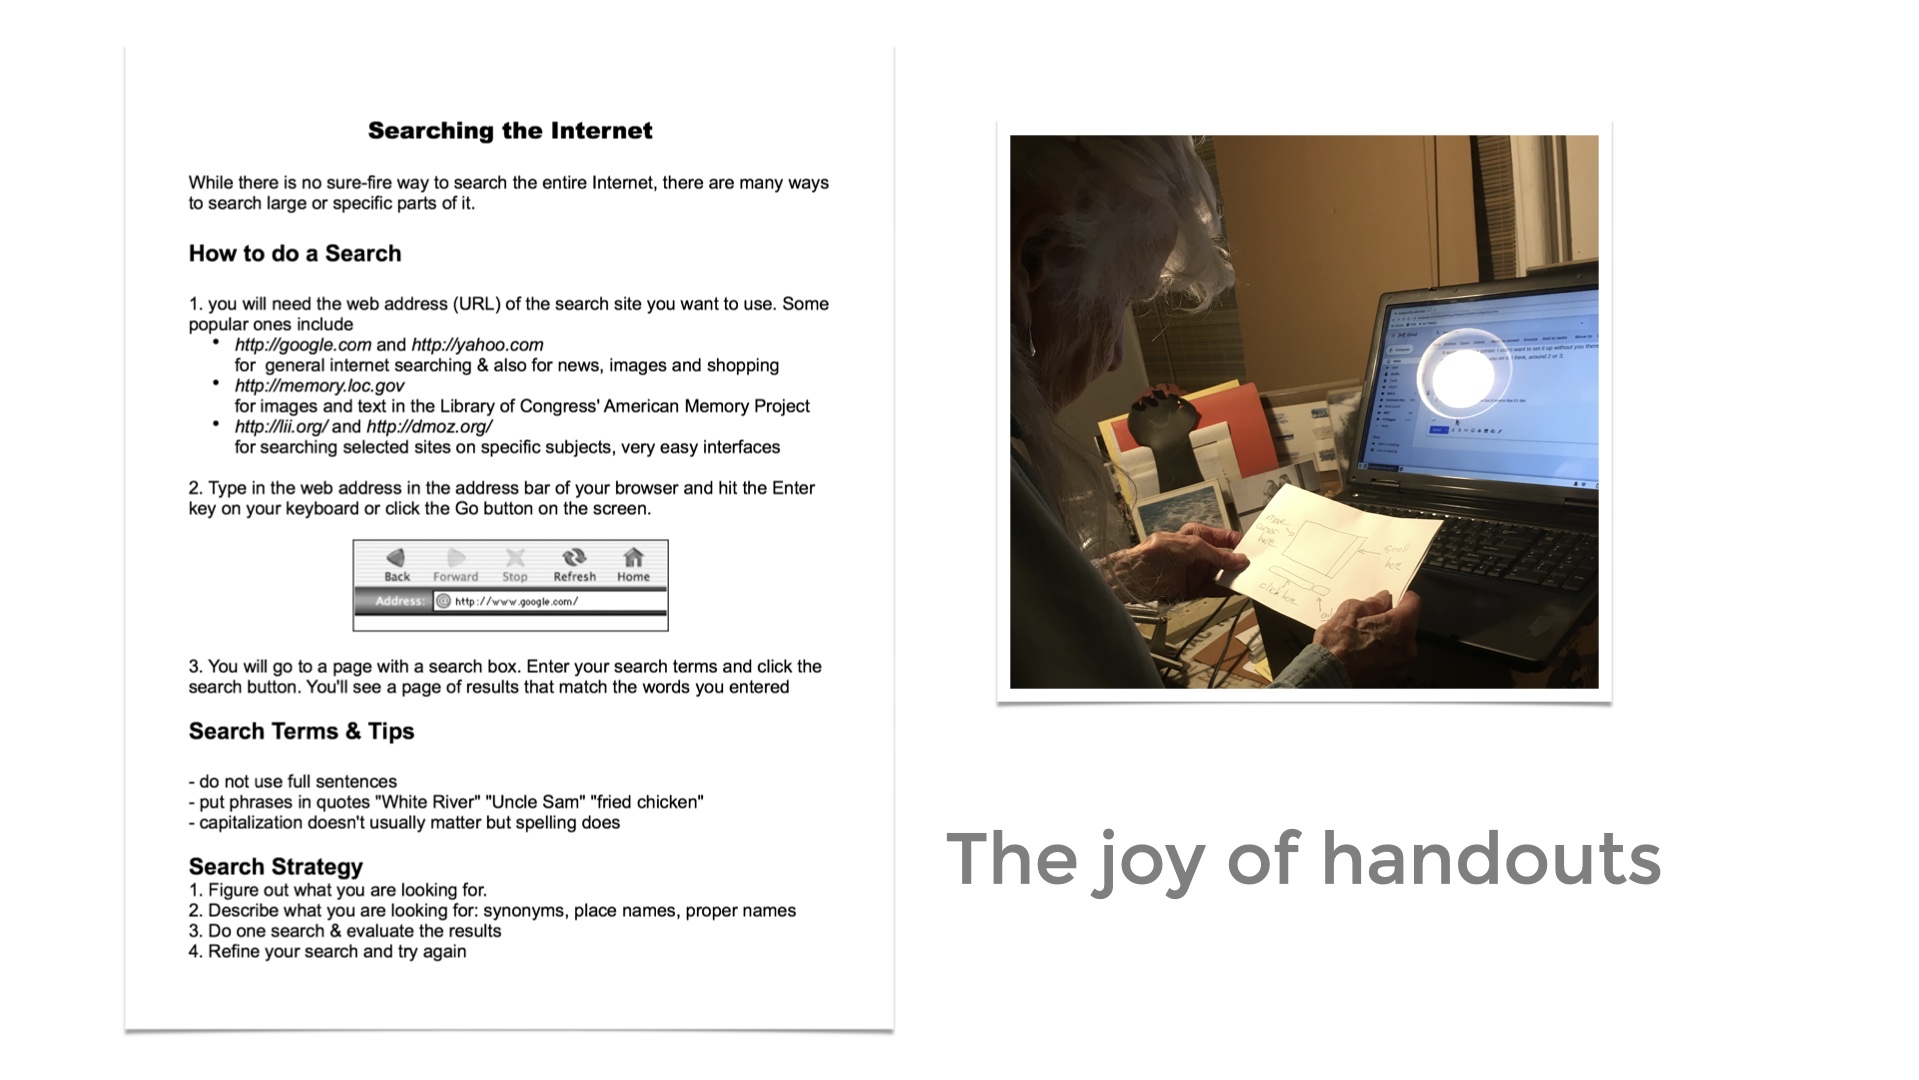 Image of a woman looking at a handout near her laptop. Inset image of a handout titled Searching the Interet. Text: The joy of handouts